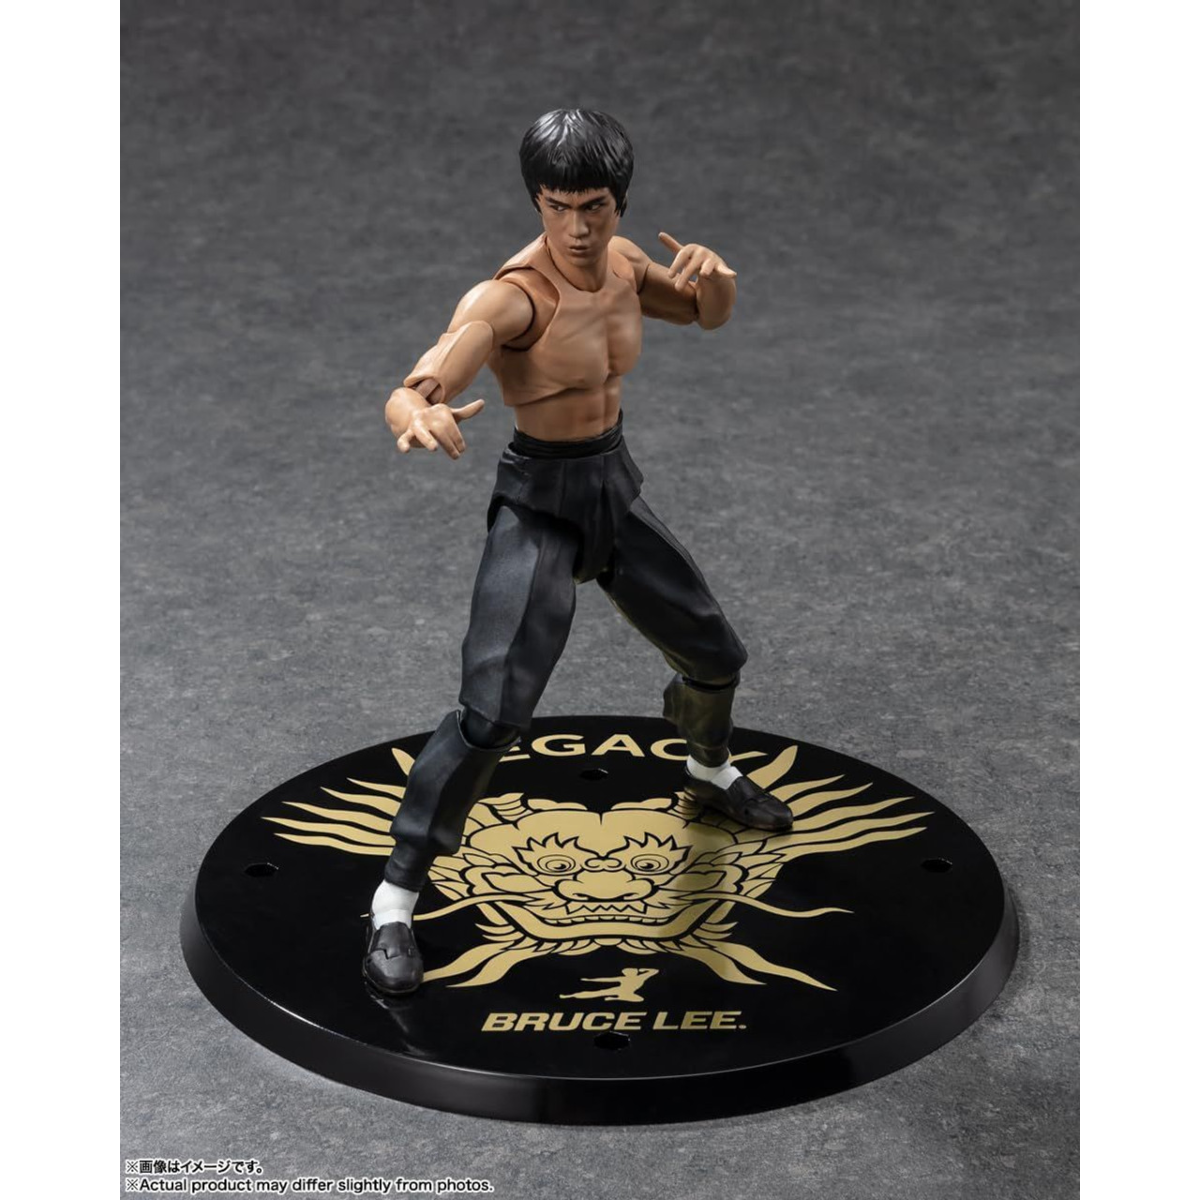 S.H.Figuarts "Bruce Lee" Legacy 50th Ver.-Tamashii-Ace Cards & Collectibles